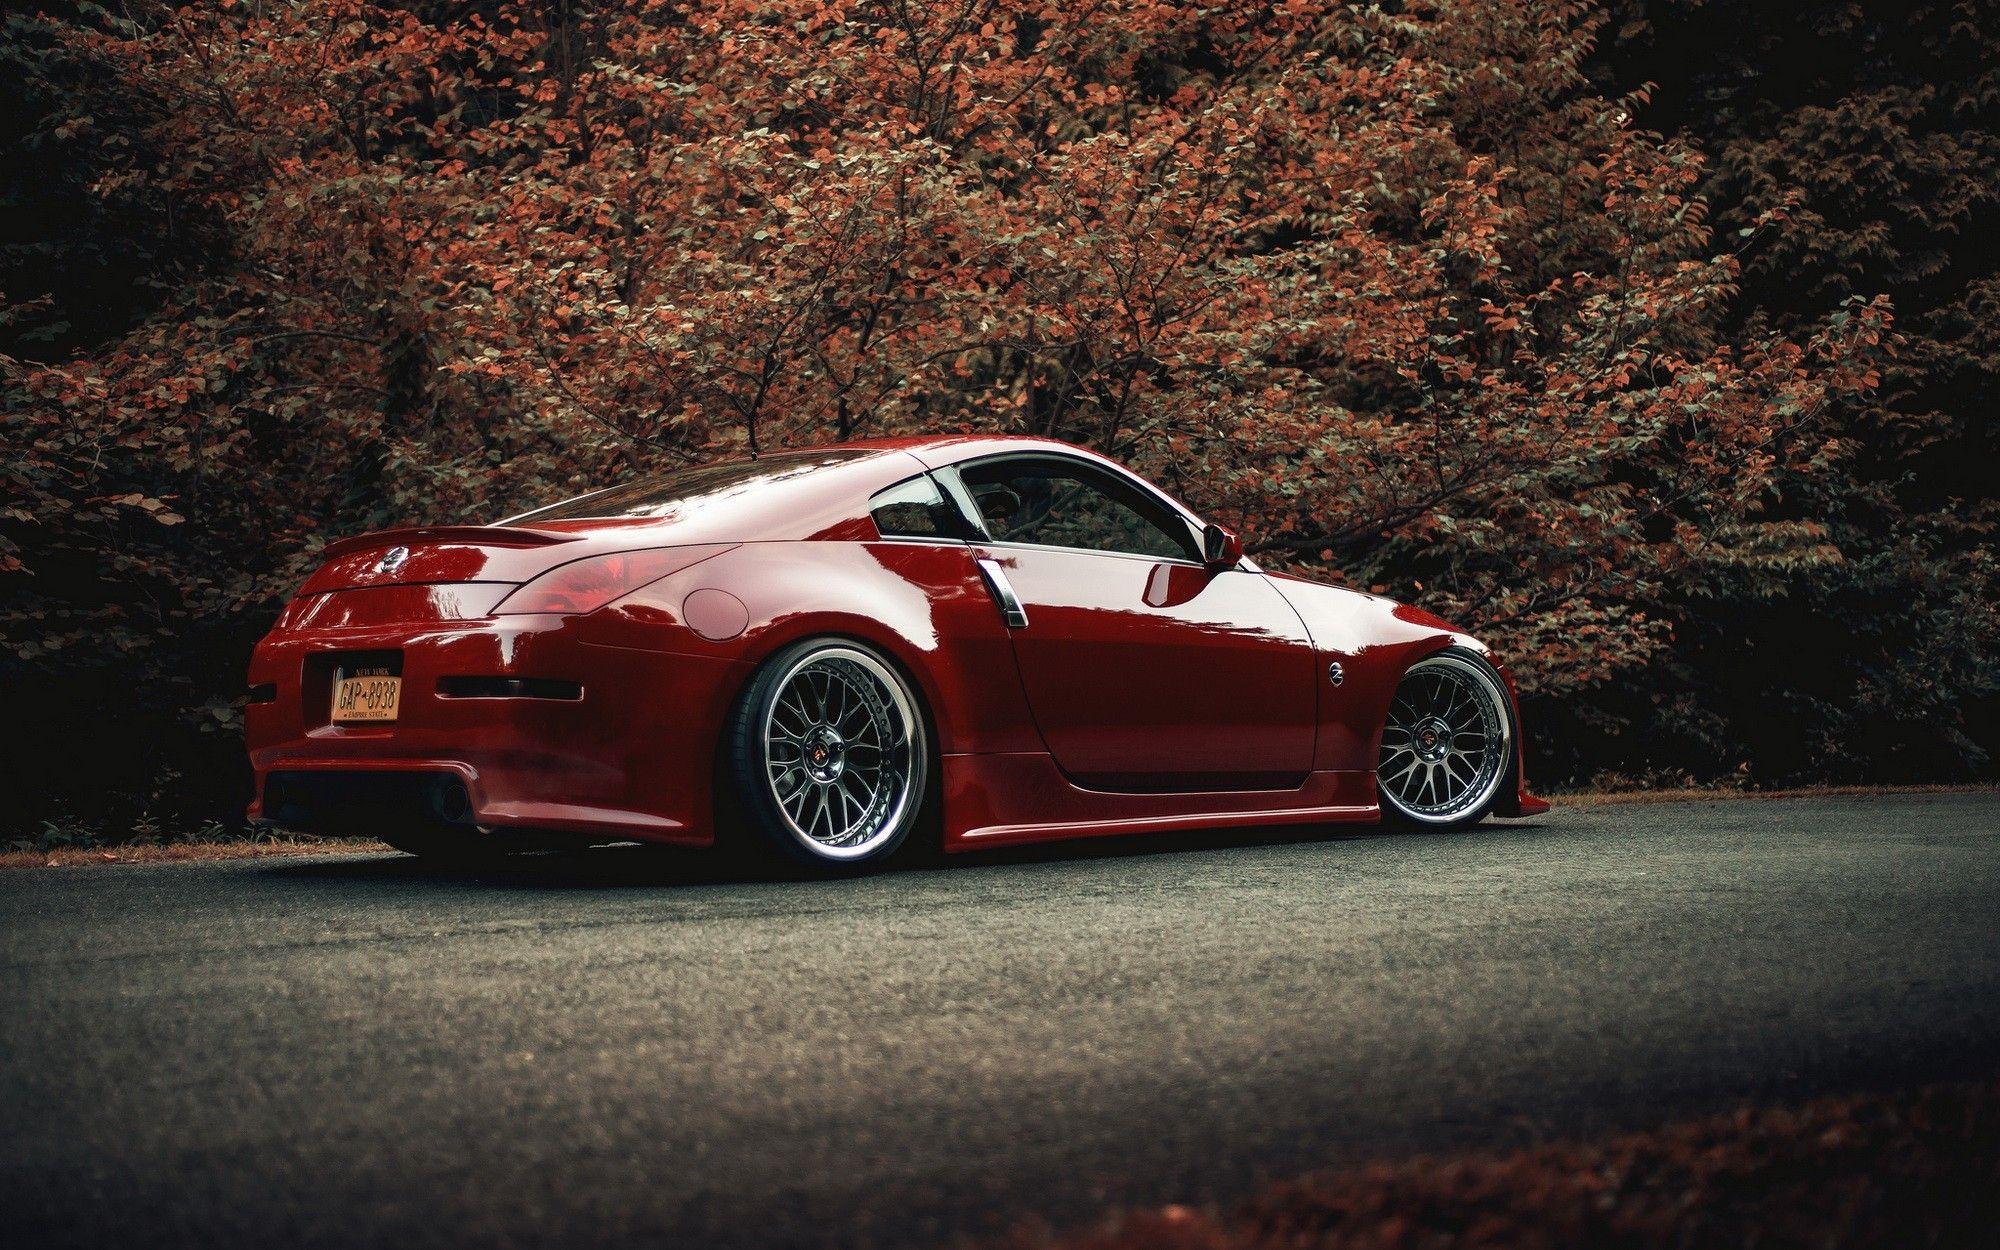 Nissan 350z cars red tuning wallpaper. PC